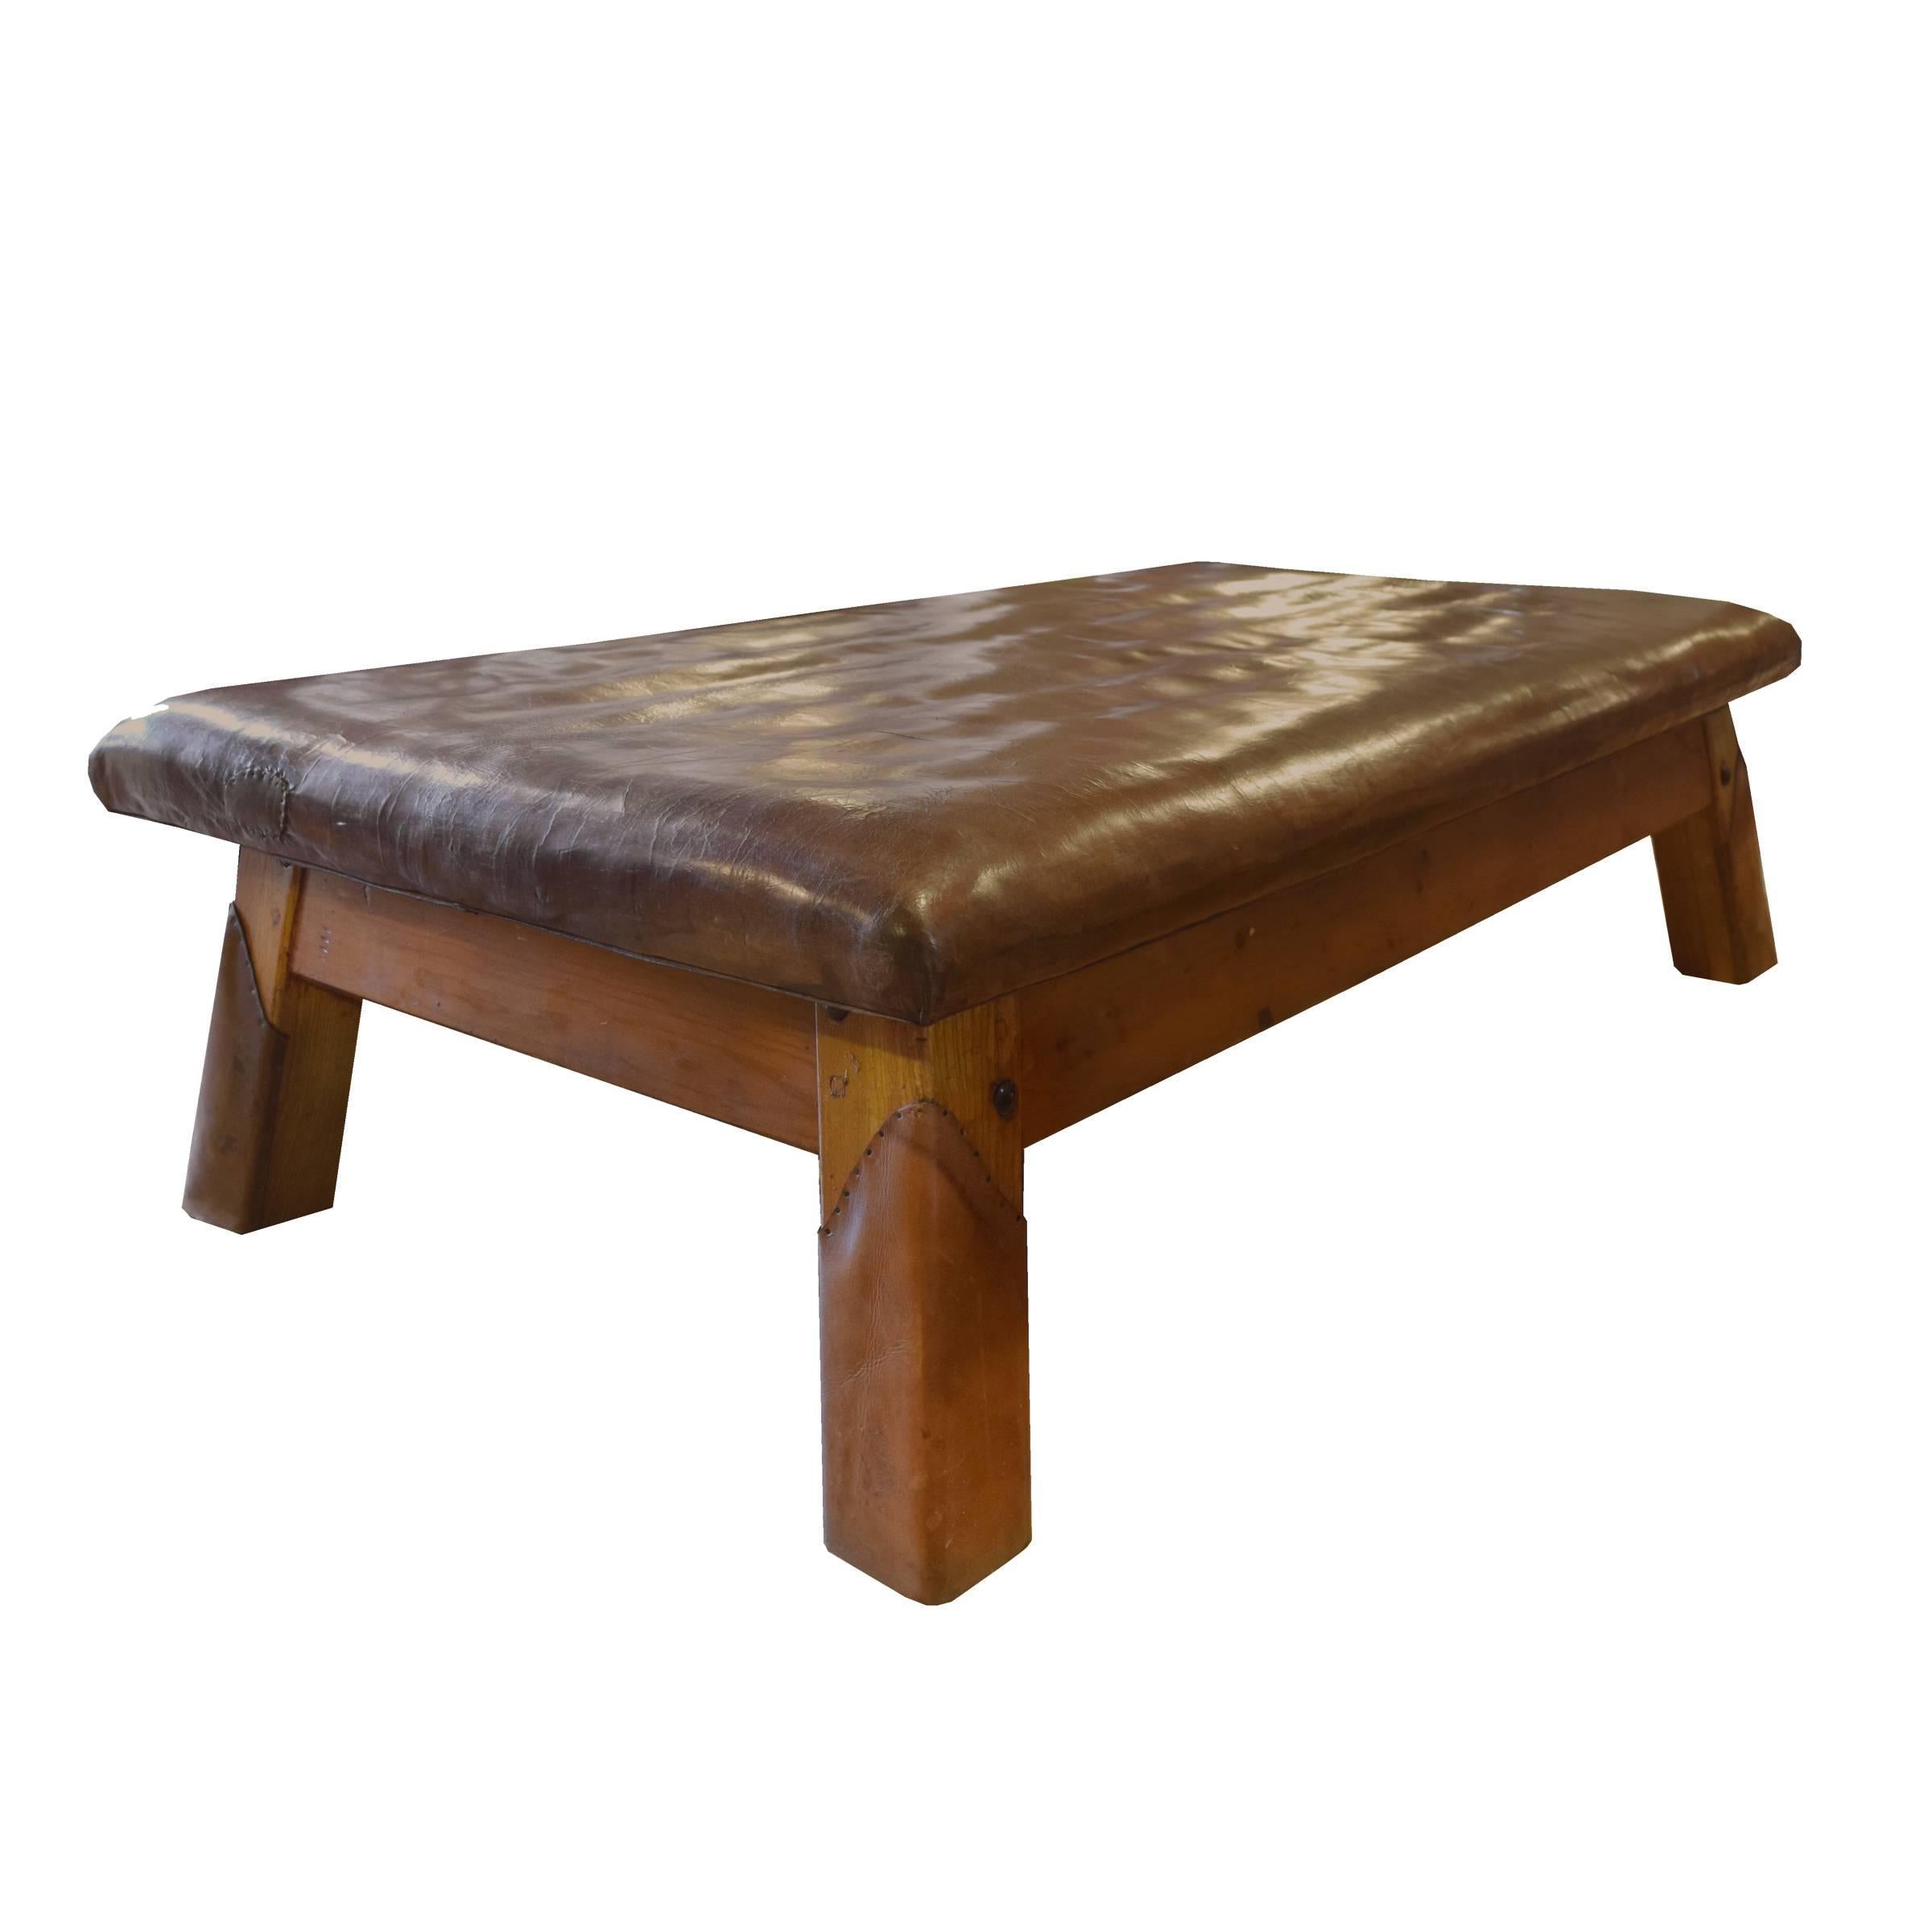 Czech Wood and Leather Vaulting Bench